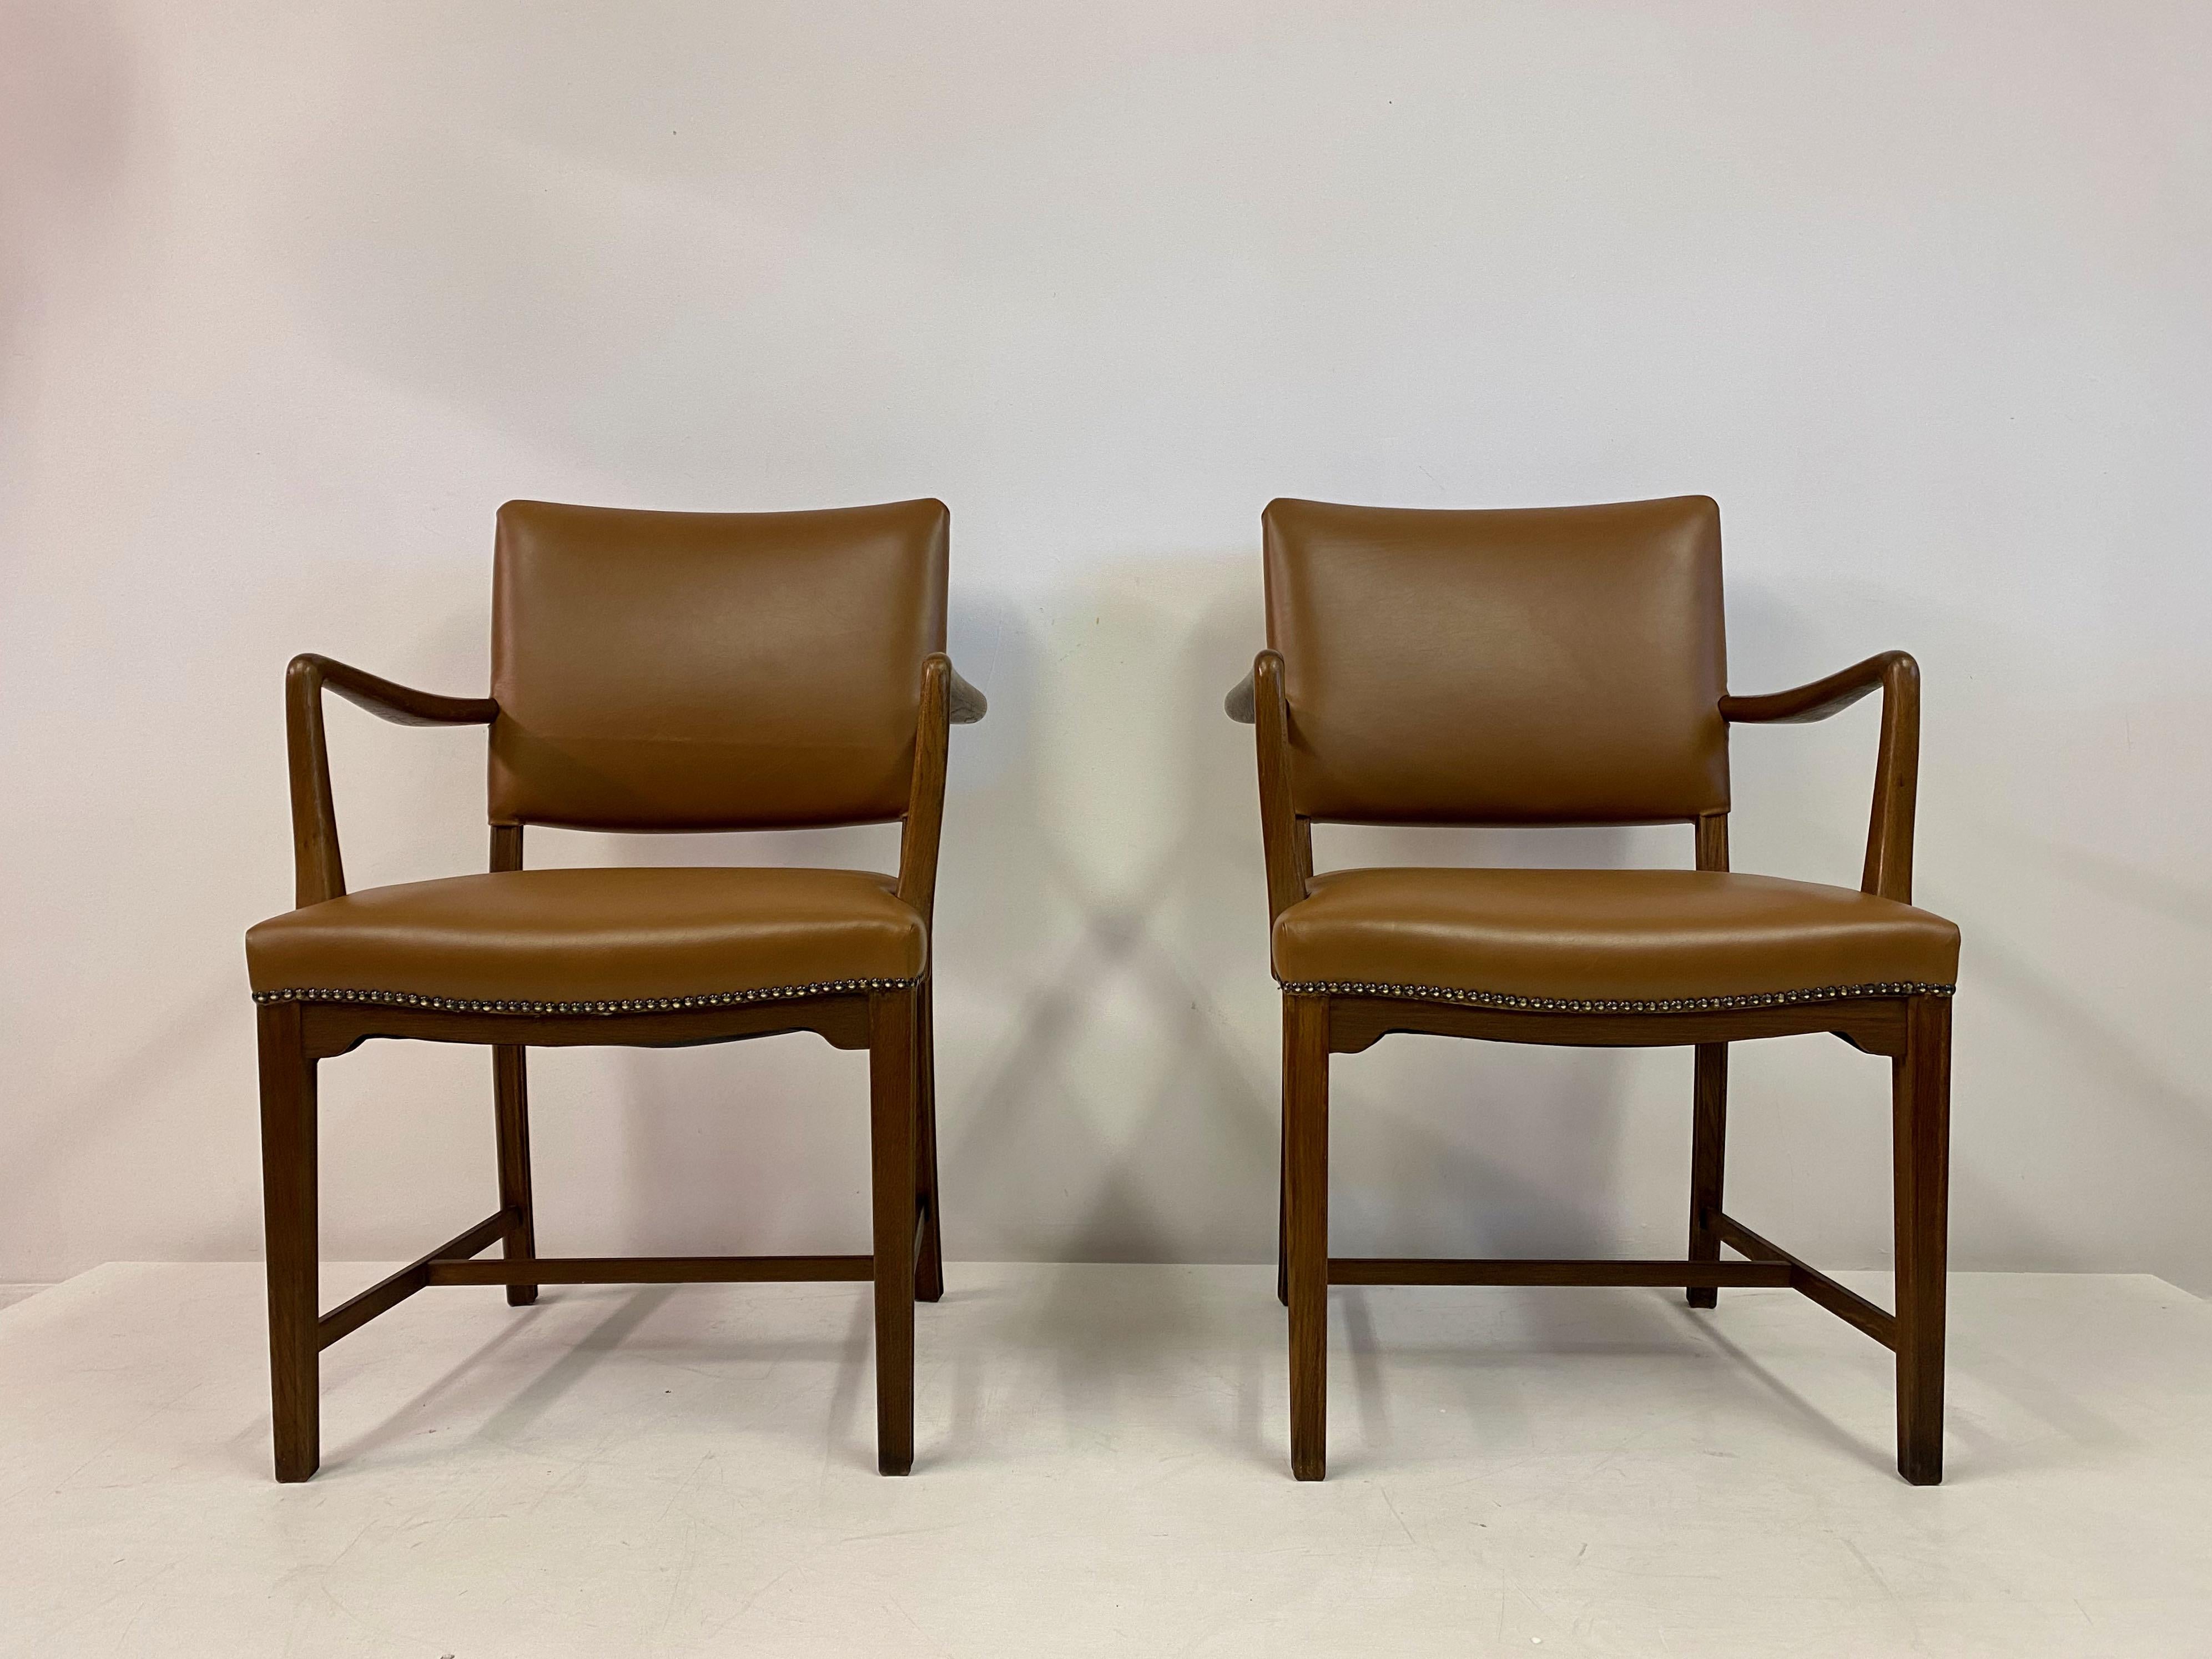 Pair of armchairs or desk chairs

Oak and beech frame

New tan leather upholstery

Retailed by Illums Bolighus (plaque underneath)

Can be sold separately

Seat height 46cm

Denmark, 1960s.